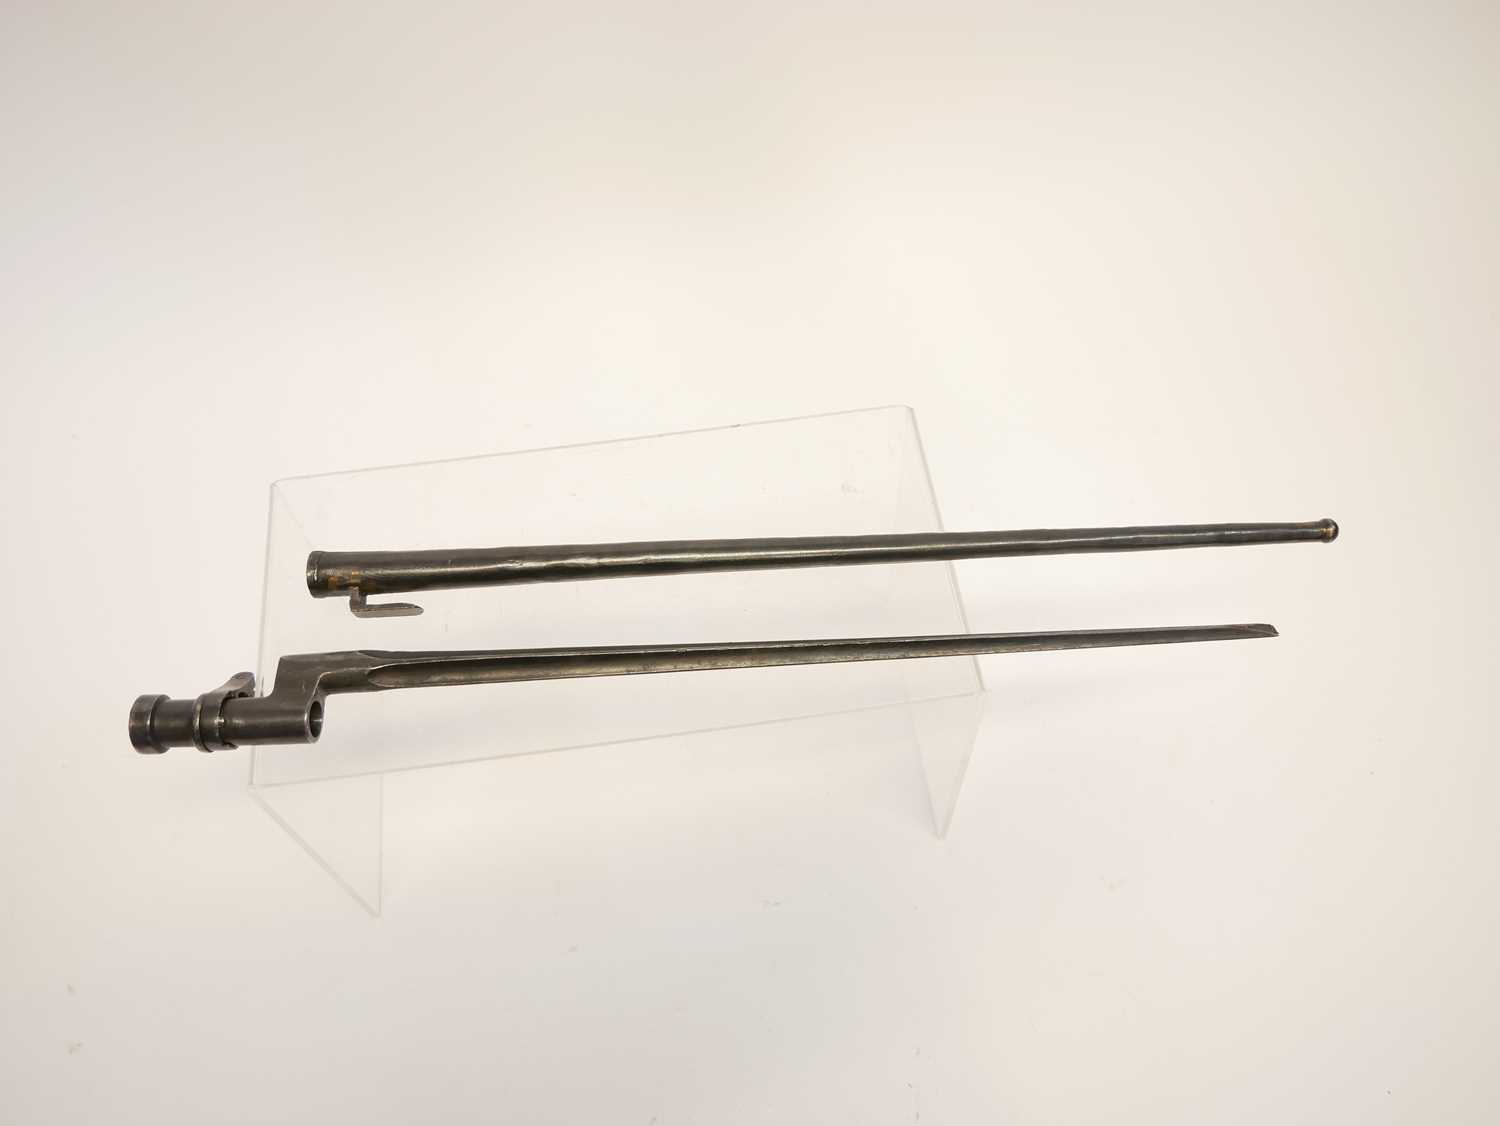 Russian M1891 Mosin-Nagant rifle socket bayonet in its steel scabbard as issued by Austria-Hungary - Image 6 of 7